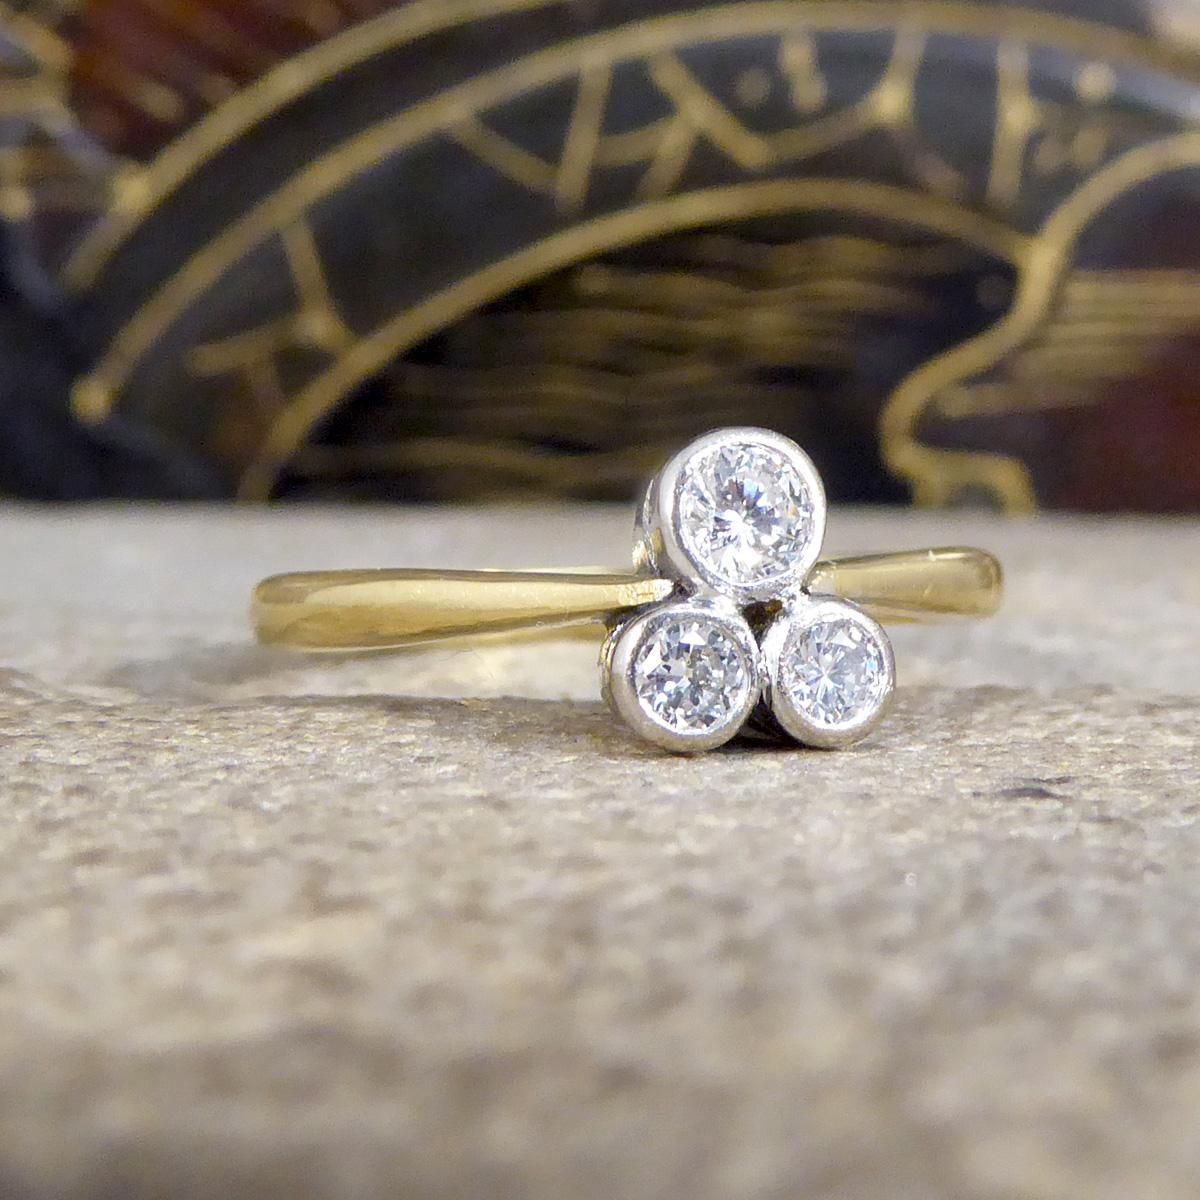 A beautiful ring that has been crafted in 2002 but designed to resemble an Edwardian style. Three collar set Diamonds sit in a triangle form to create a three leaf clover without the stem, such a simple and stunning design. The perfect gift that can